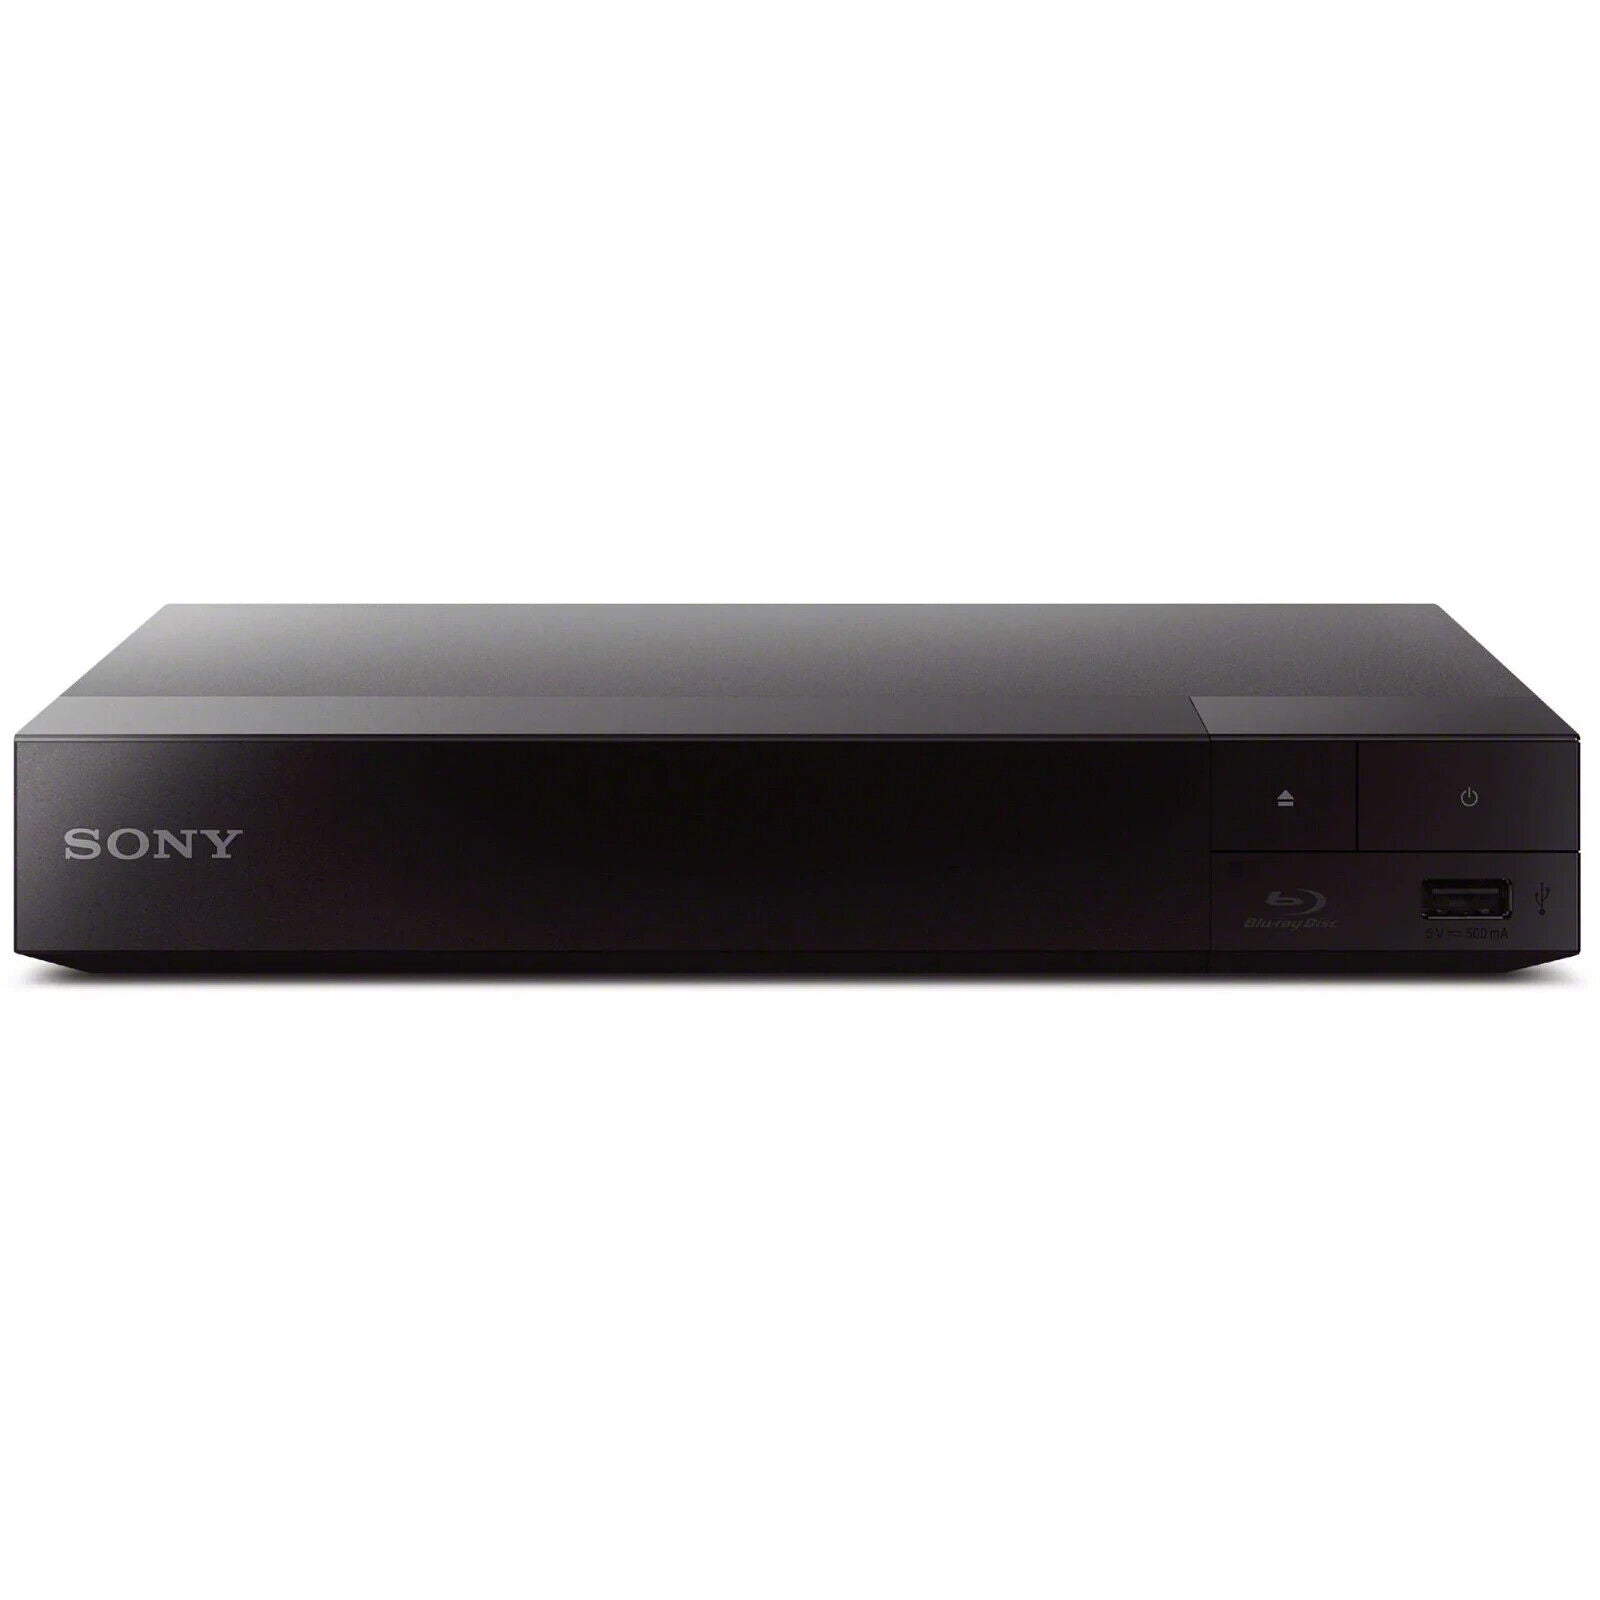 SONY Smart Blu-ray DVD Player with Built-in Wi-Fi BDP-S3700